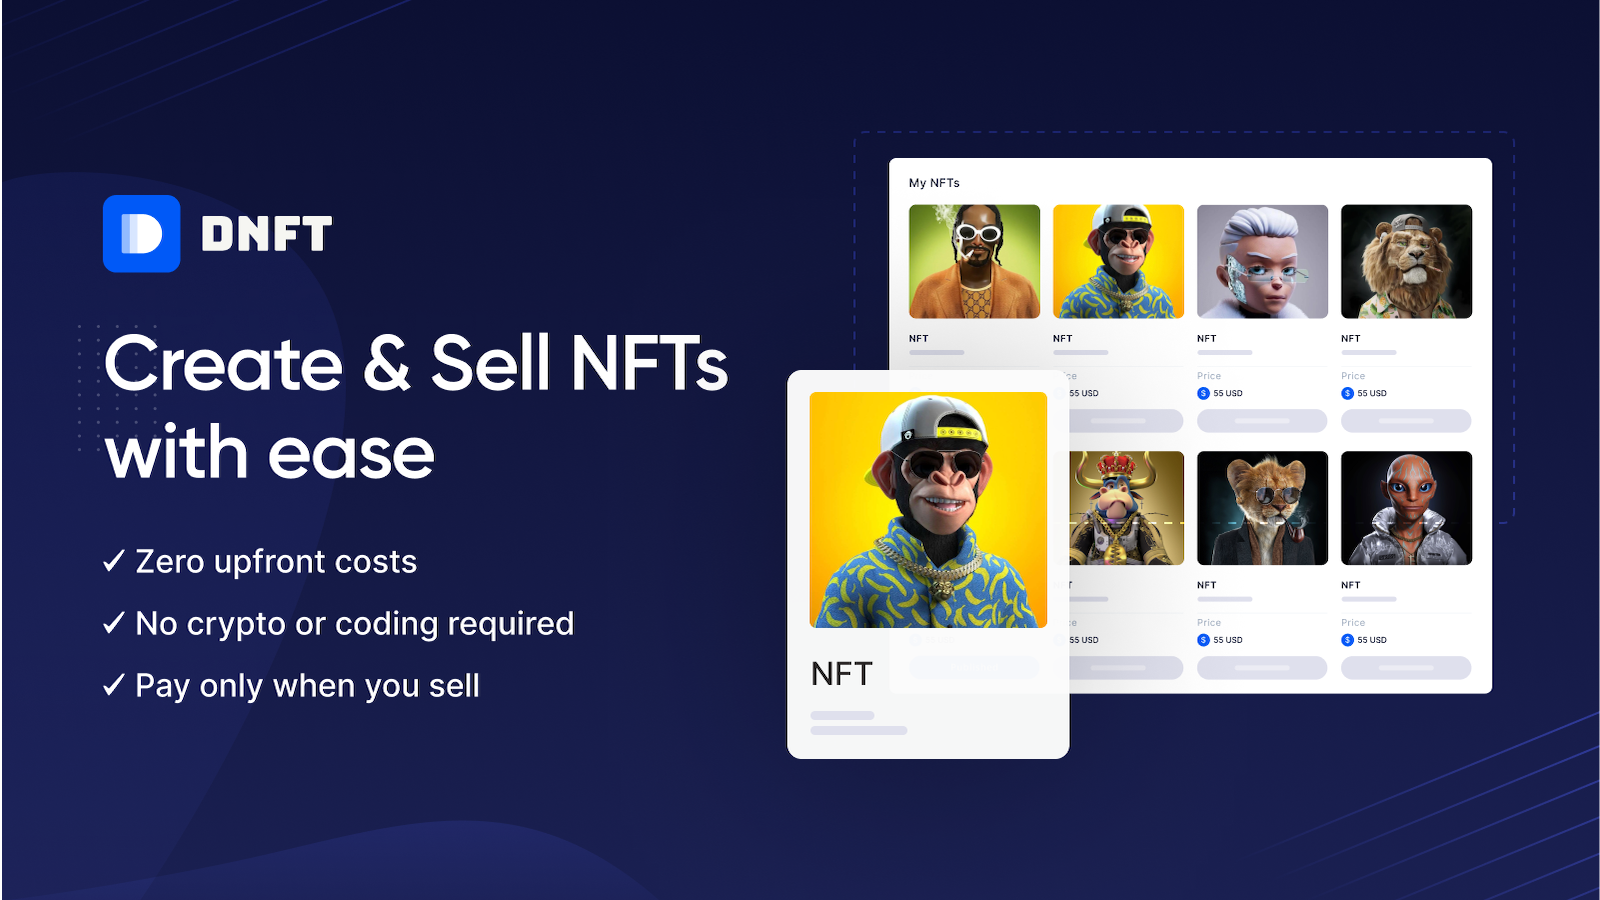 Create & Sell NFTs with easy on Shopify